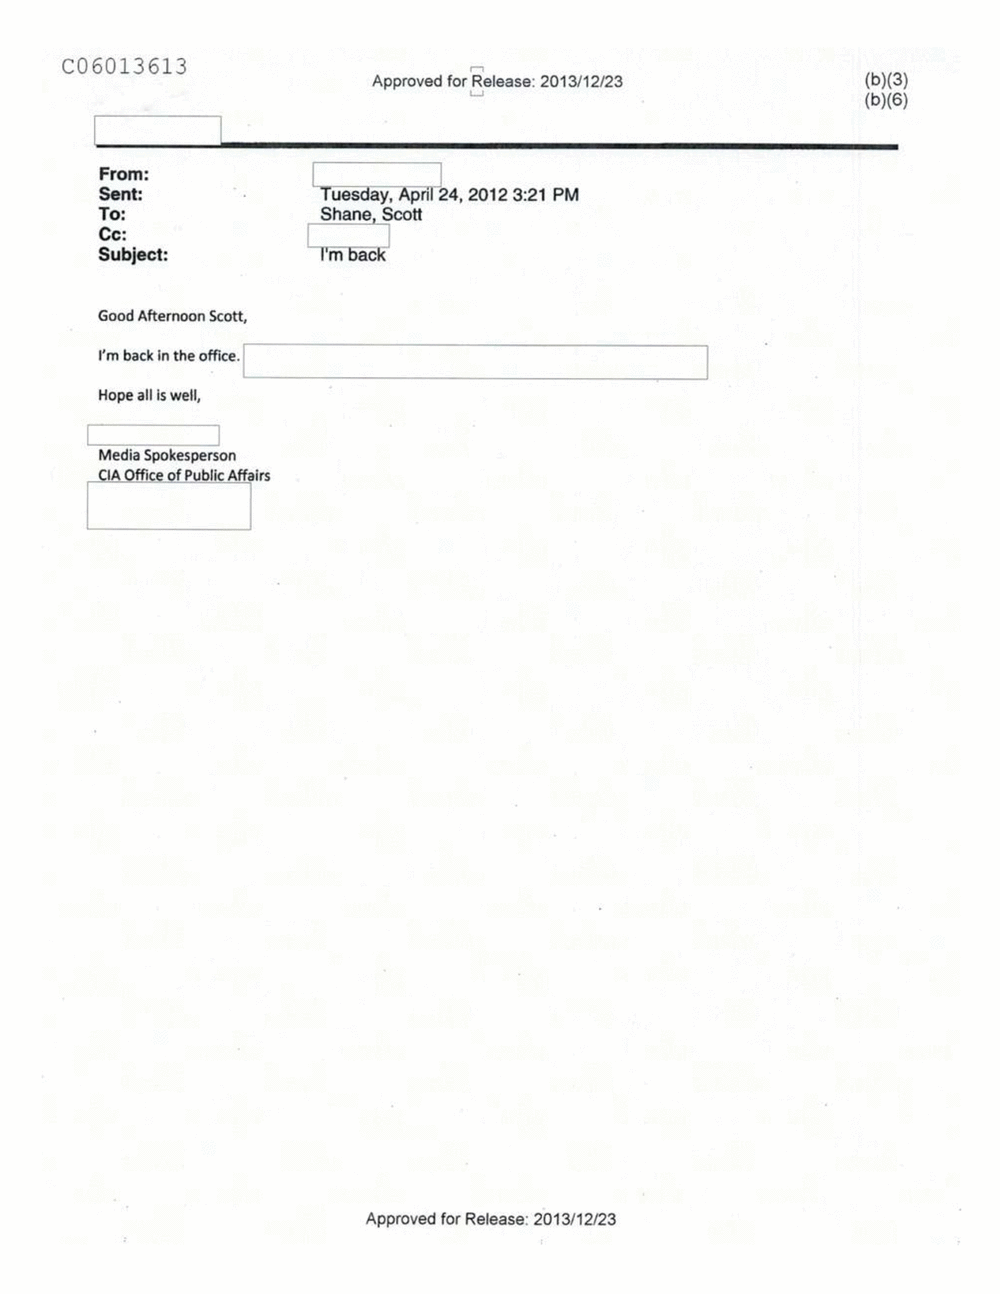 Page 433 from Email Correspondence Between Reporters and CIA Flacks